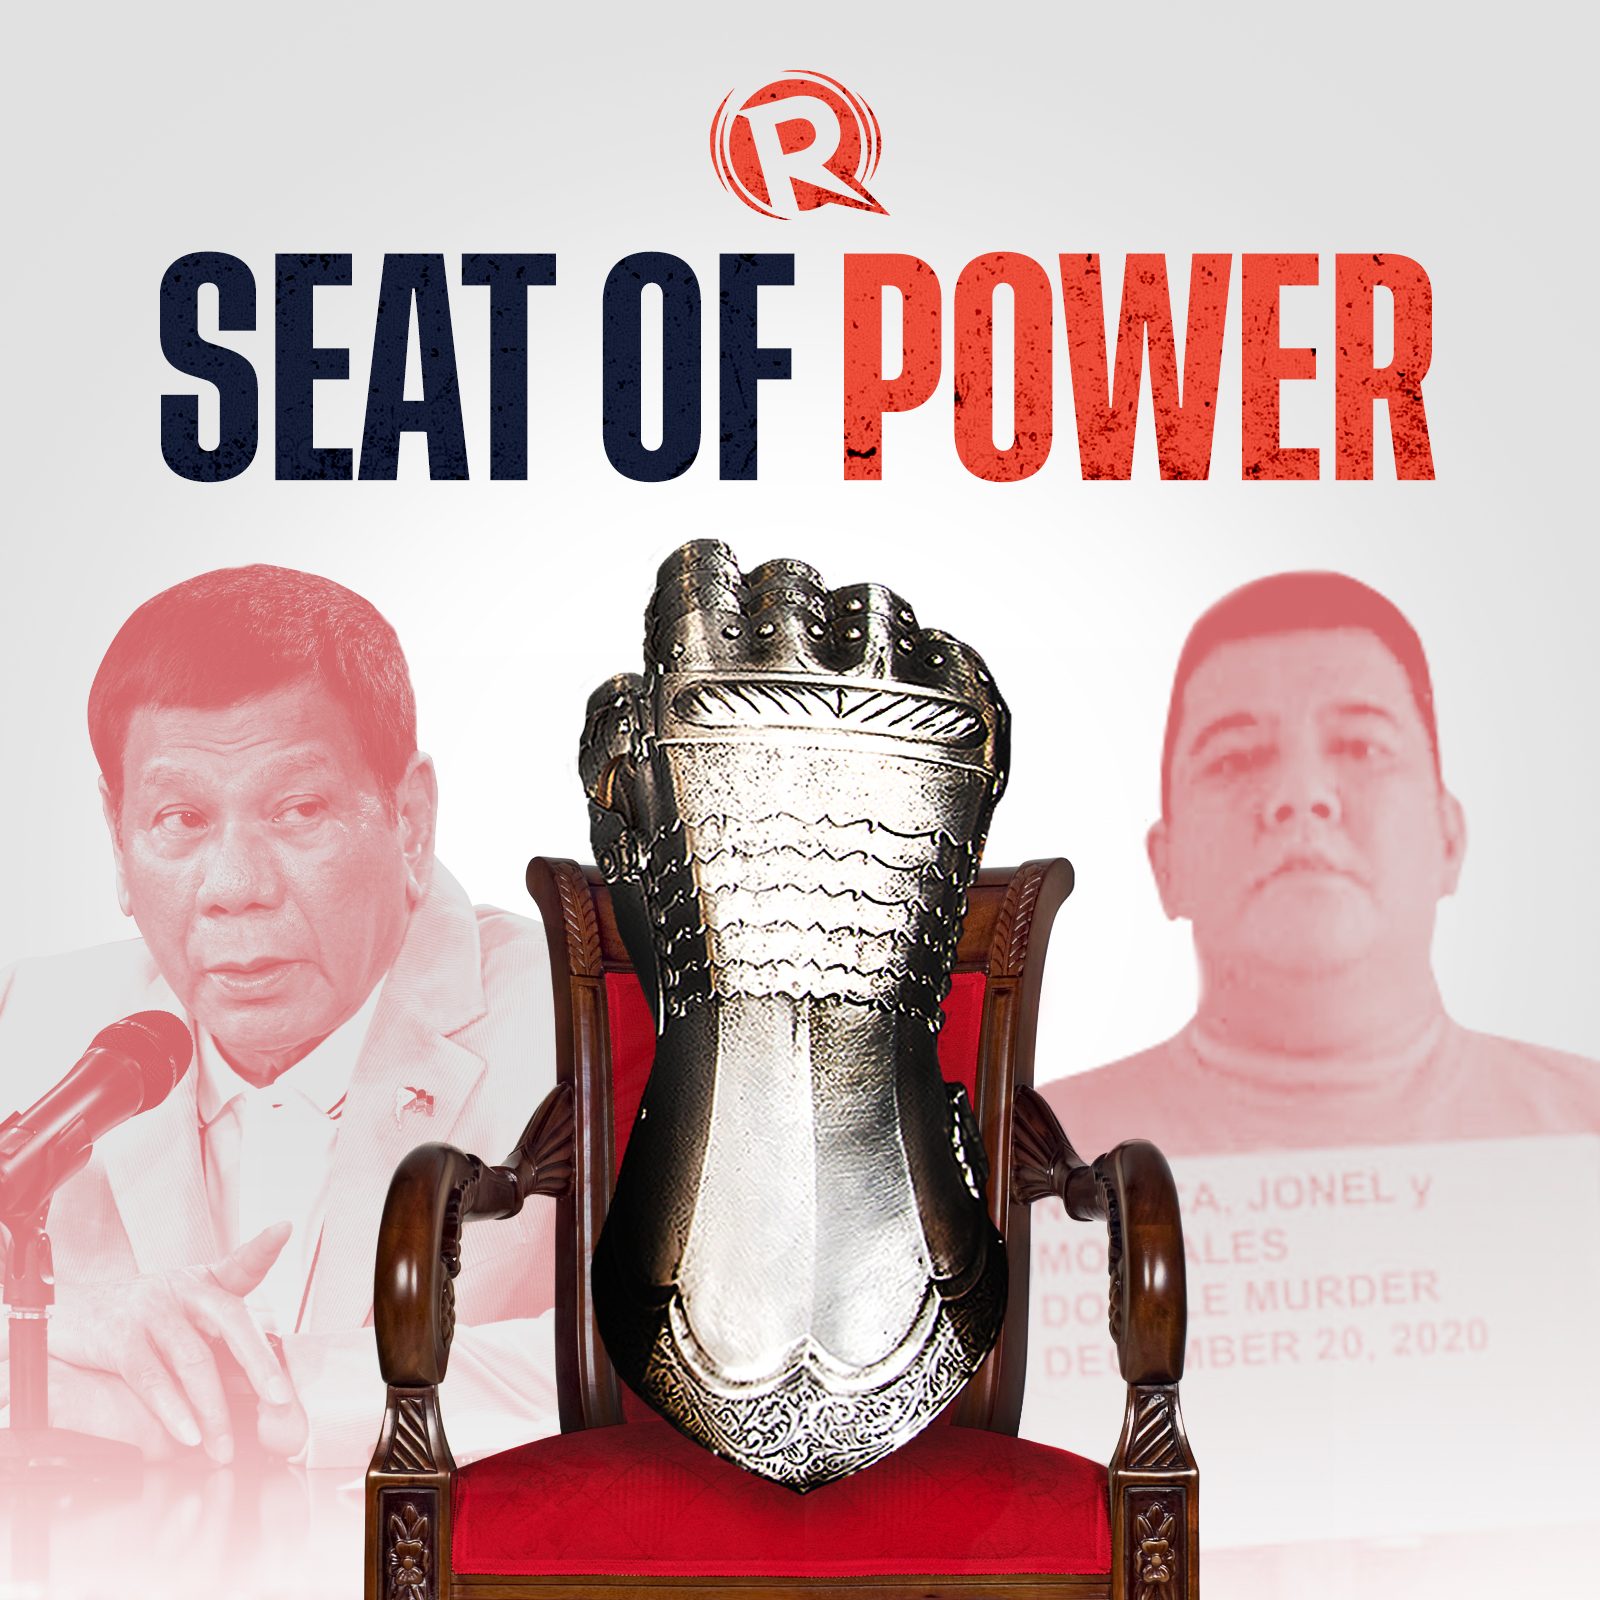 [PODCAST] Tarlac shooting: Blood on Duterte’s hands